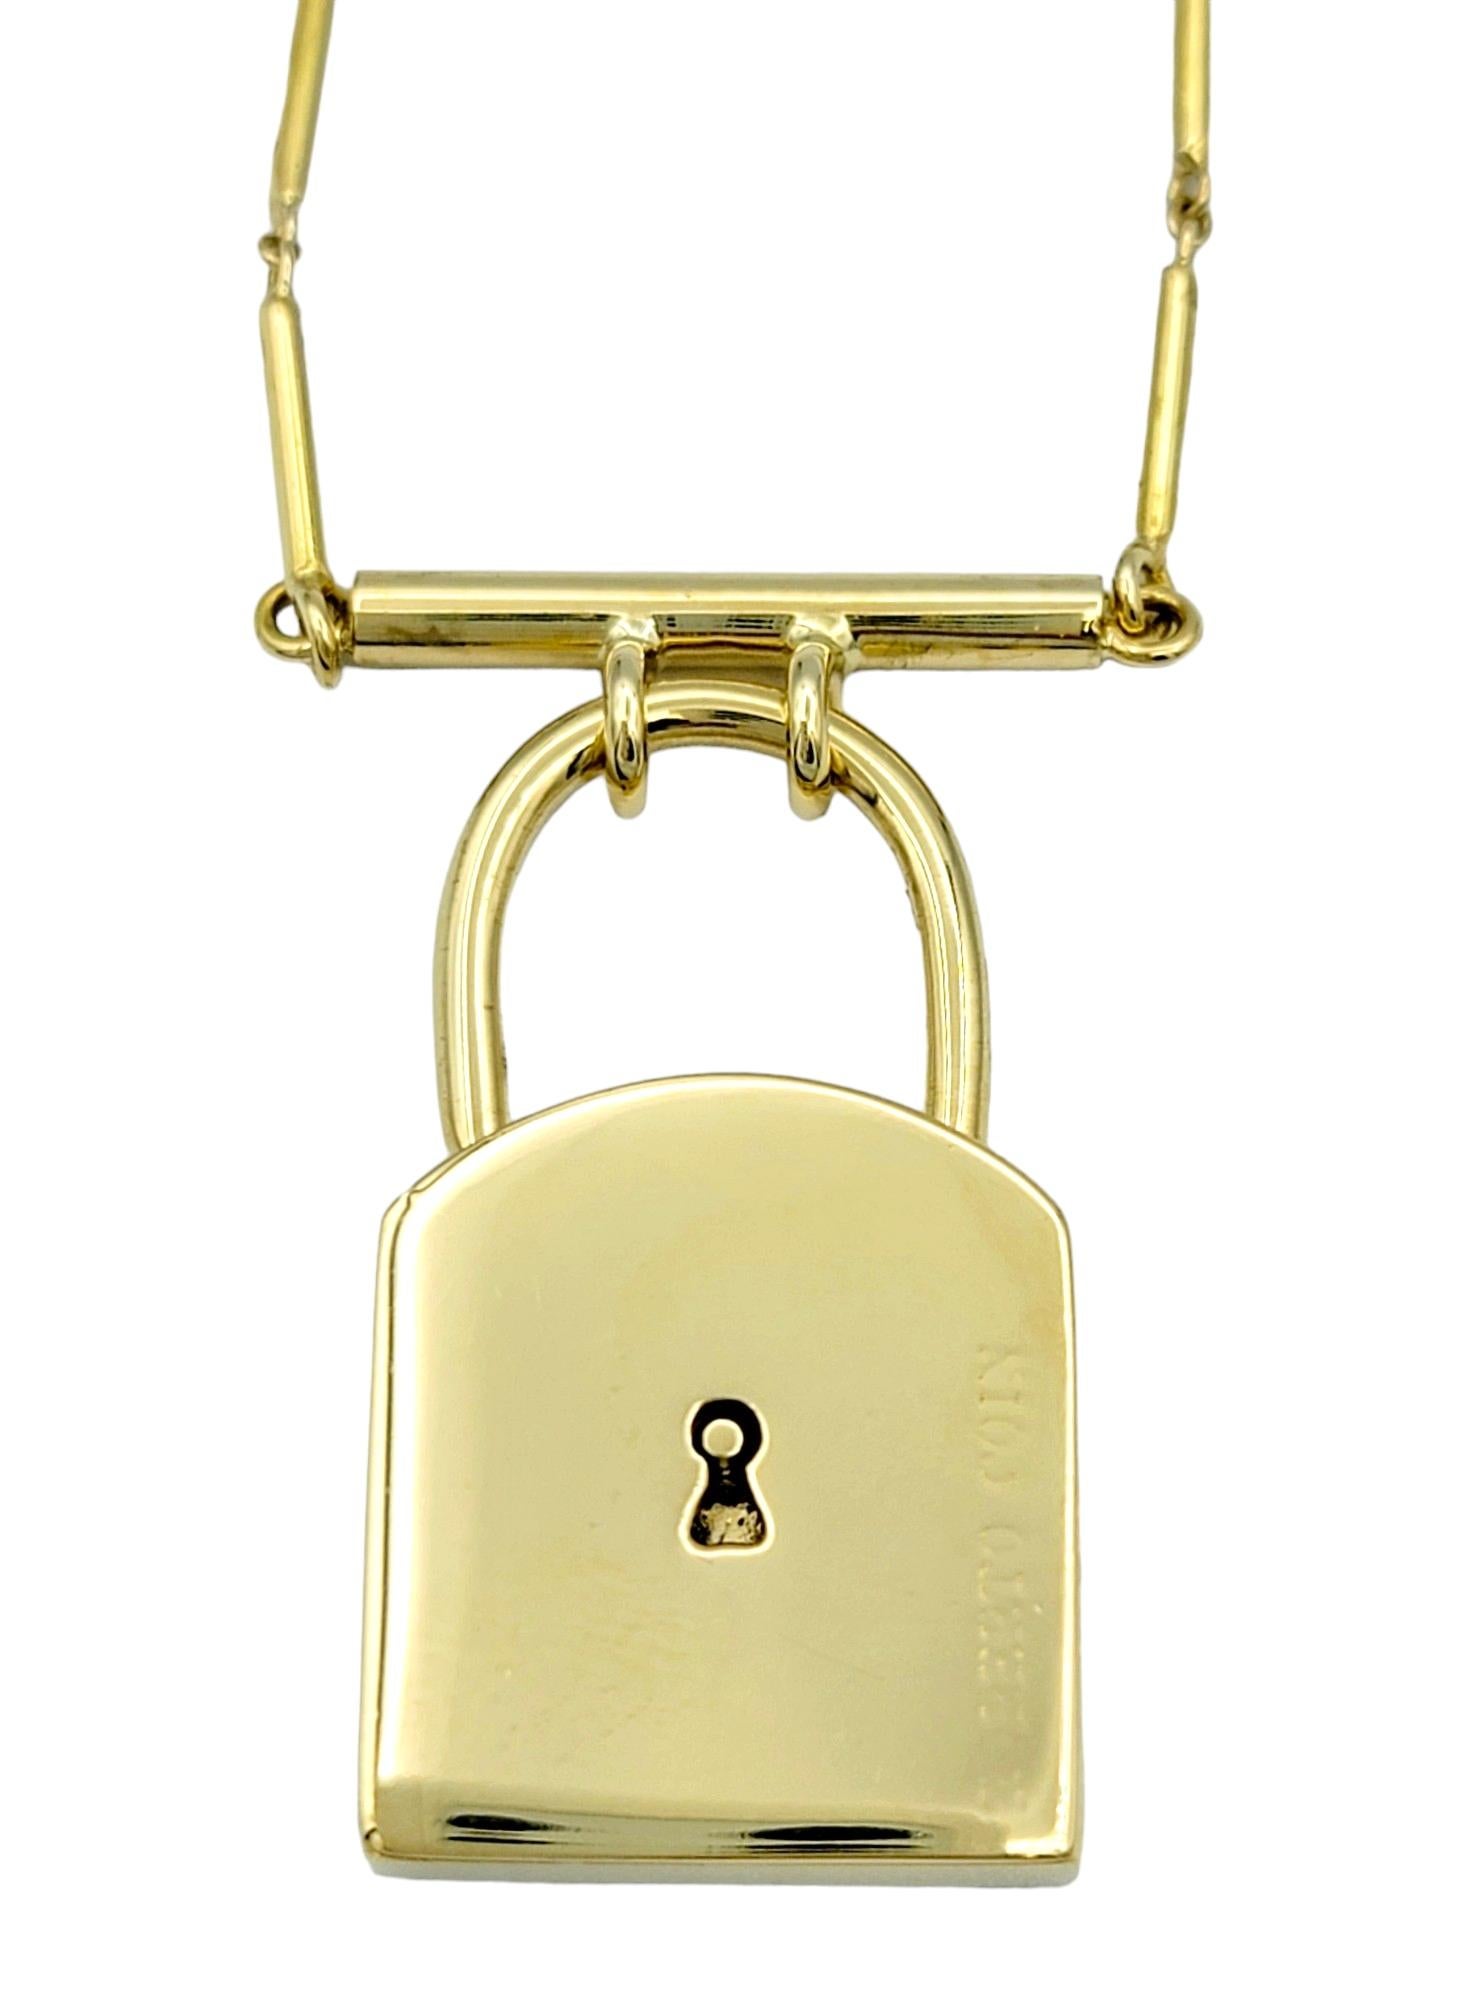 Contemporary Roberto Coin Padlock Pendant Necklace with Bar Link Chain 18 Karat Yellow Gold For Sale